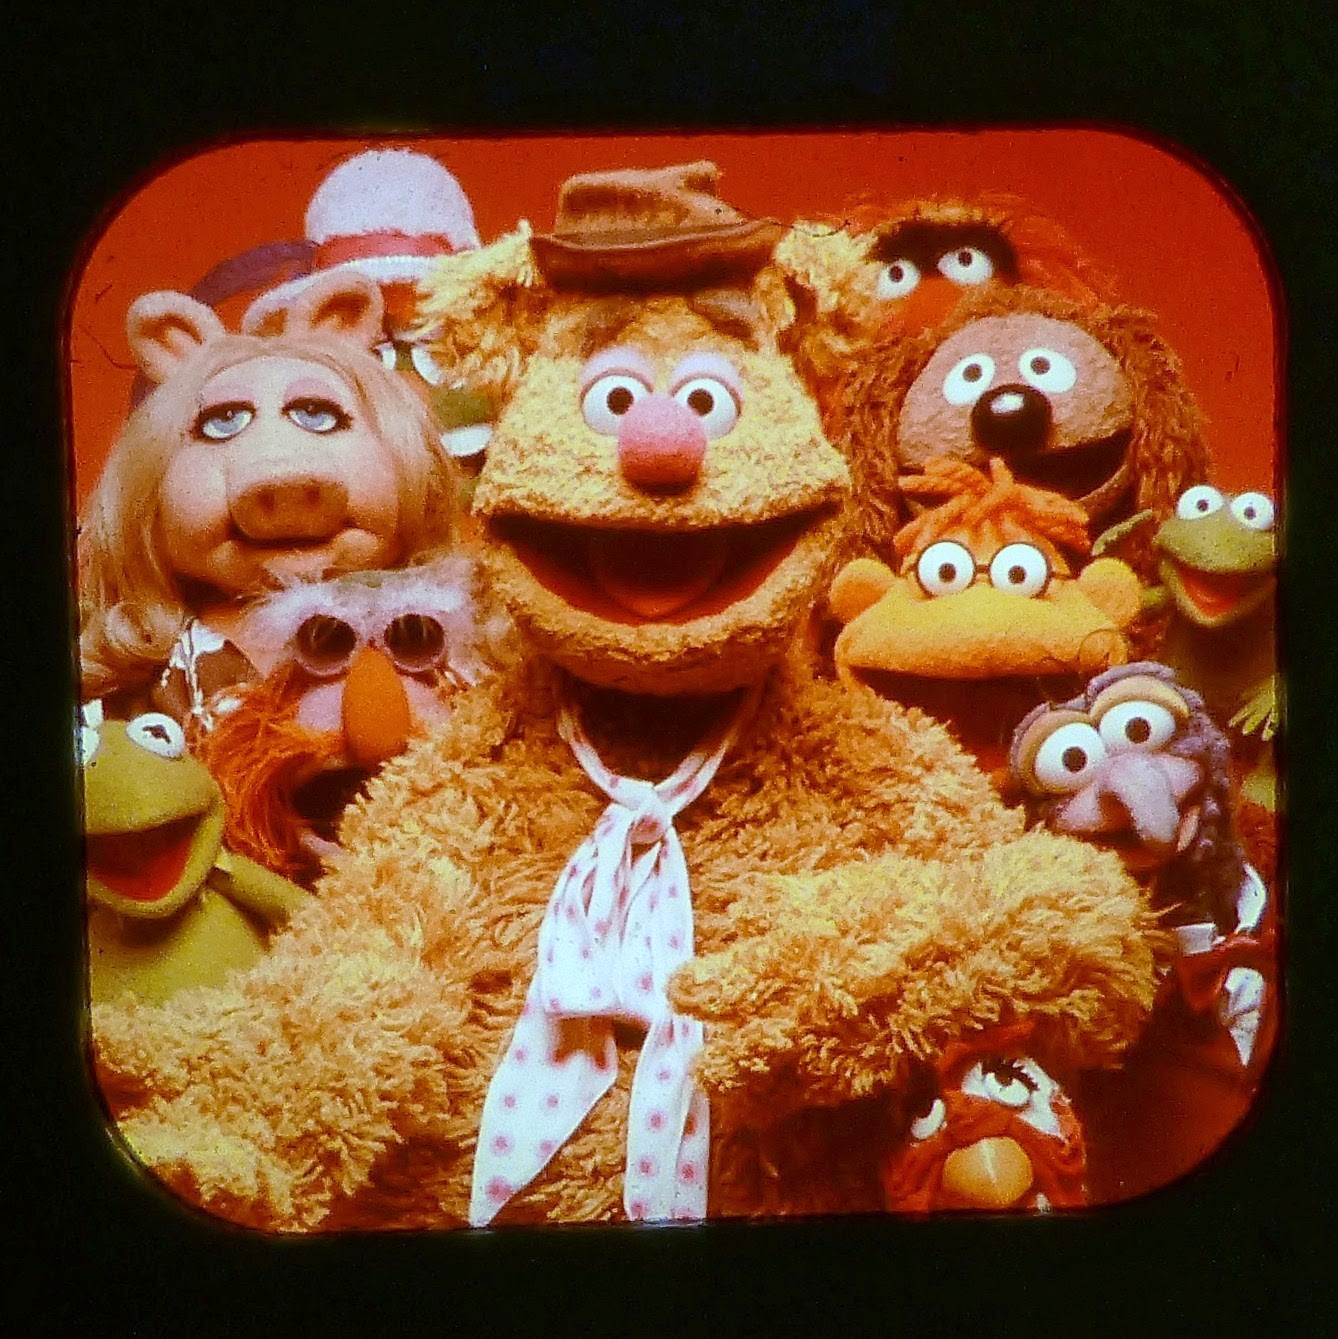 Vintage MUPPET View-Master Reel scans! Amazing Iconic Images